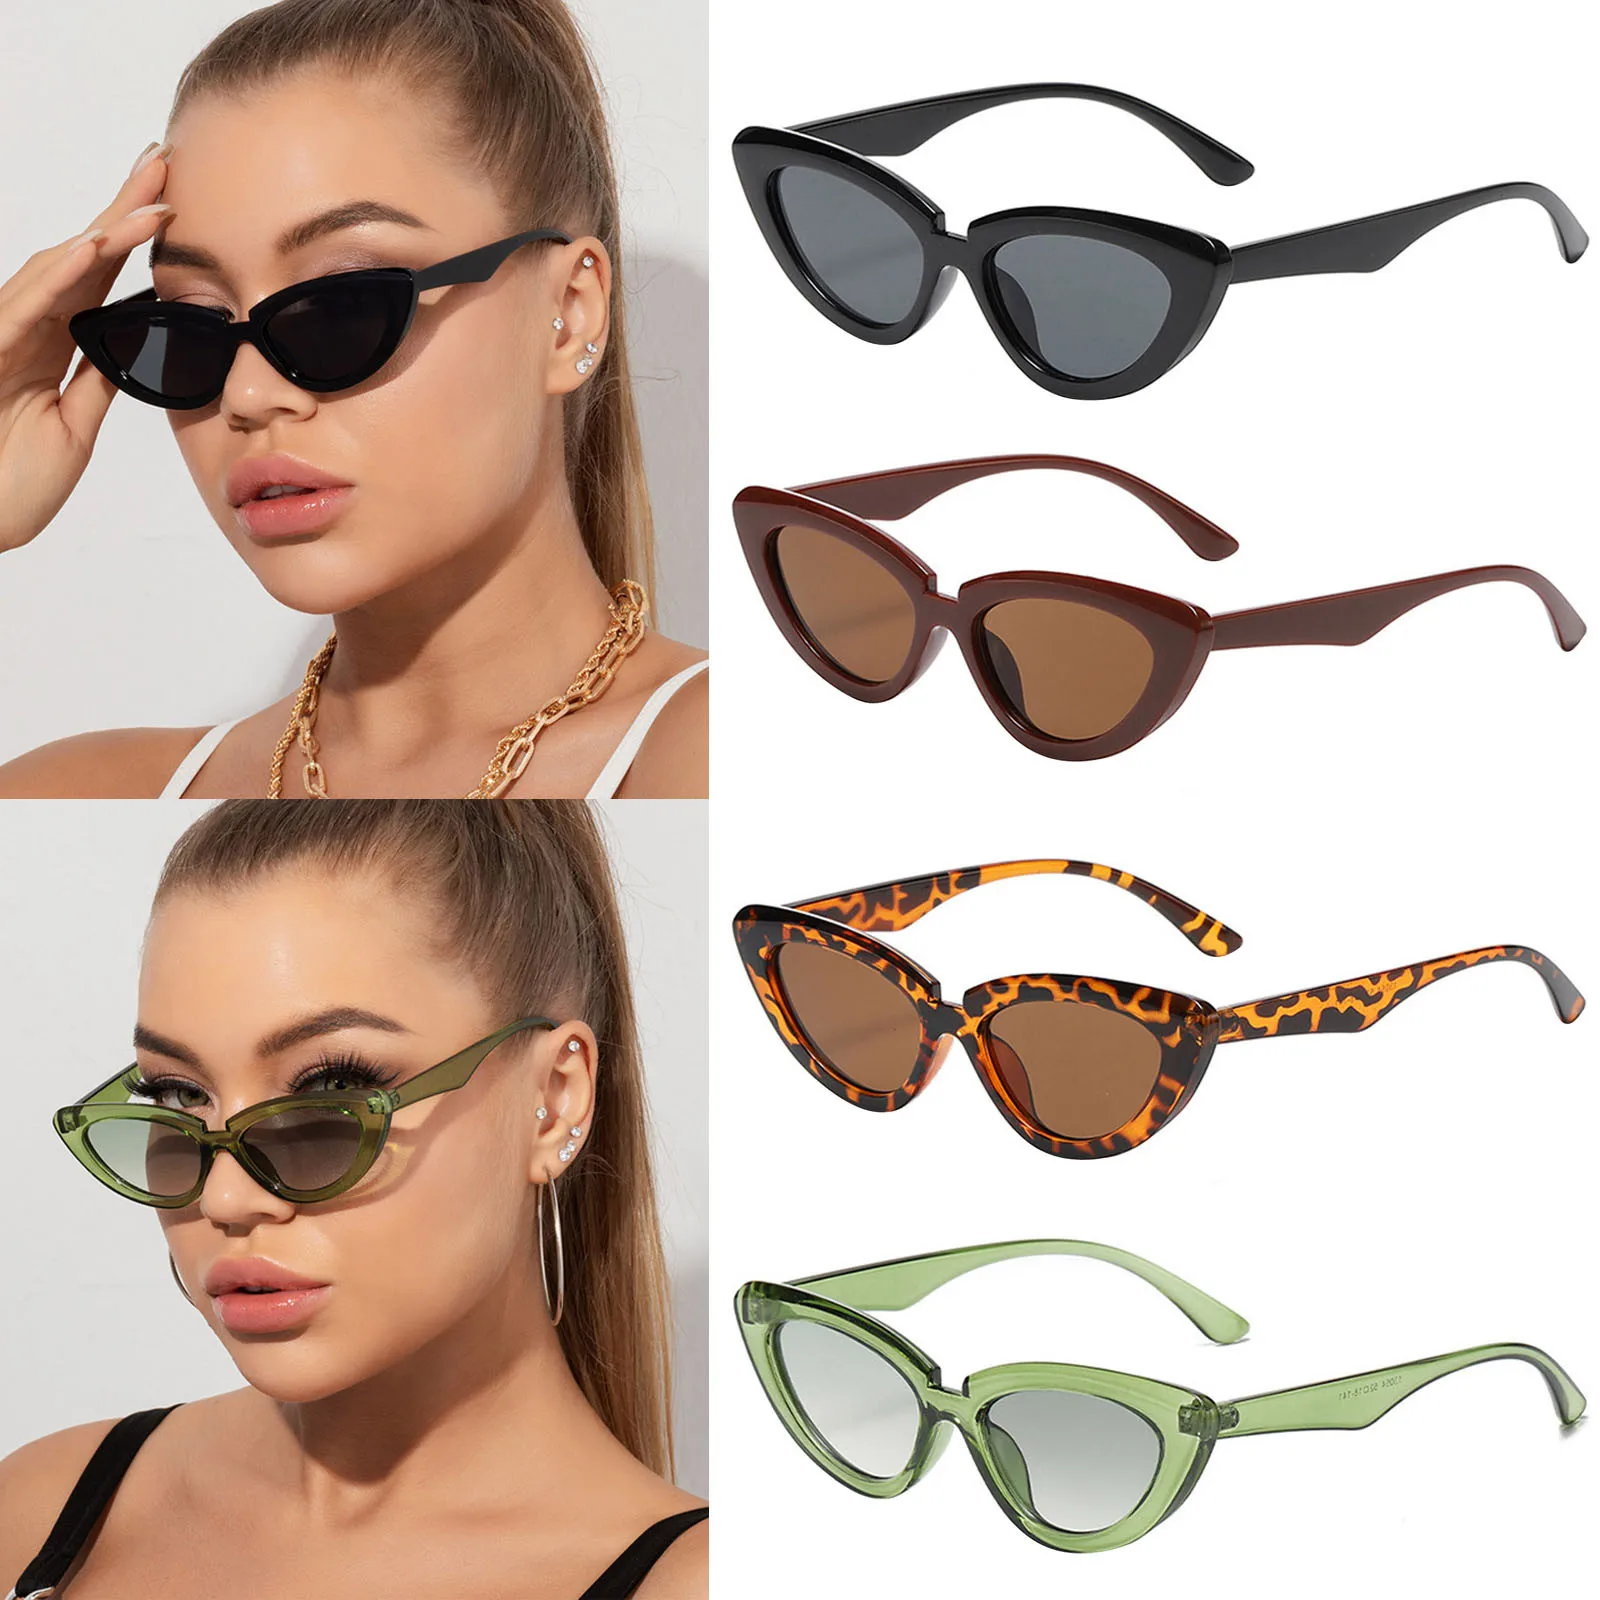 

Women Oval Cat Eye Sunglasses Vintage Wrapped Driving Fishing Goggle Black High Quality Anti-glare Chameleon Oculos De Sol